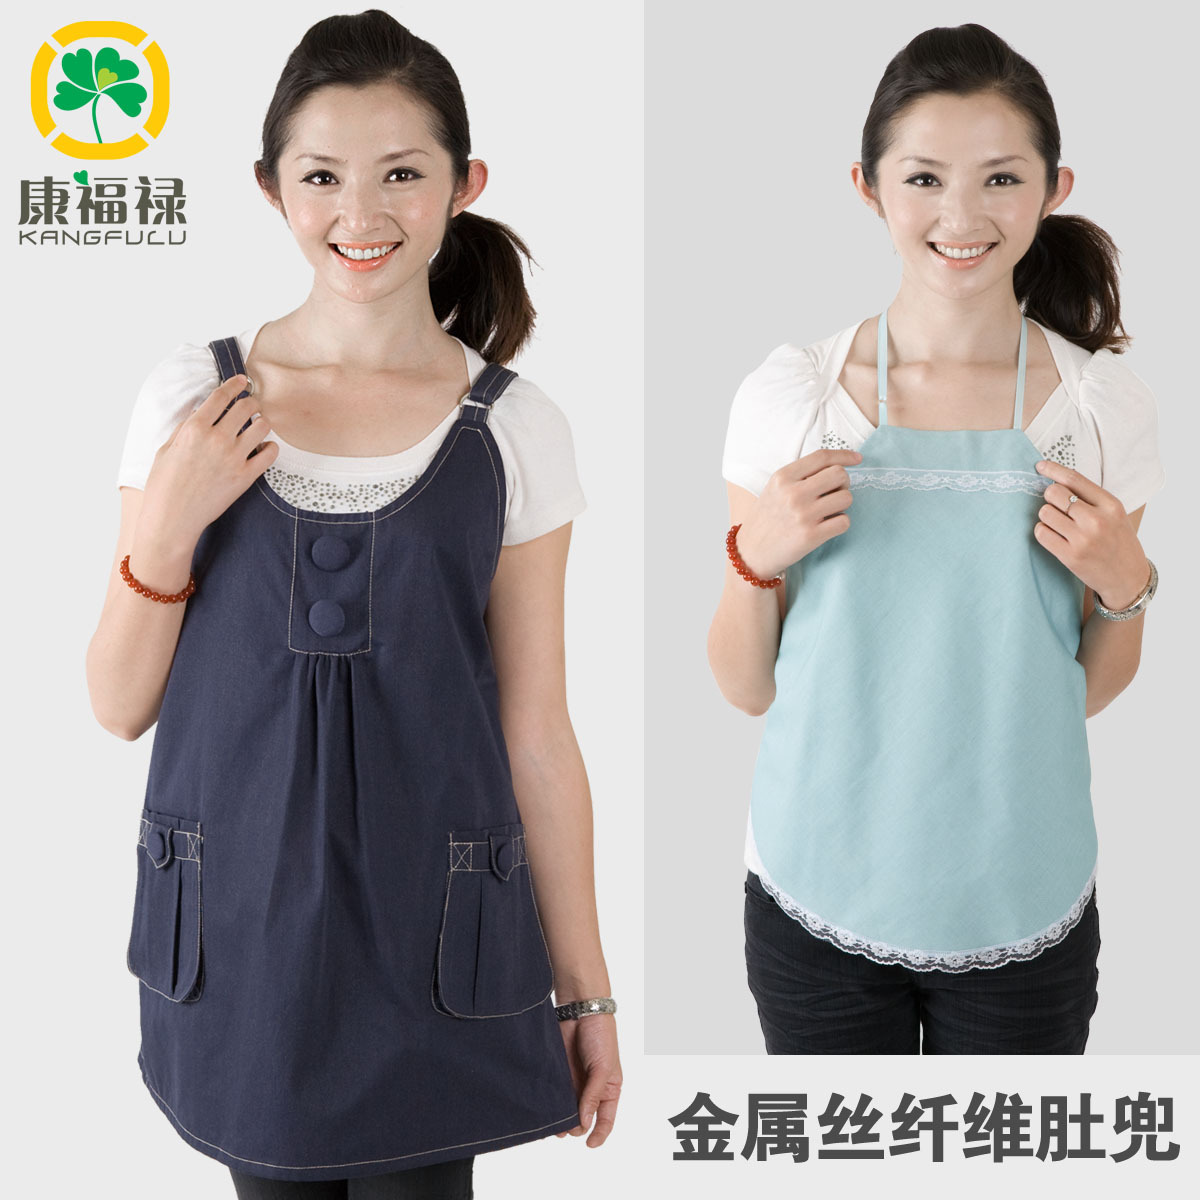 New arrival radiation-resistant maternity clothing radiation-resistant vest 906